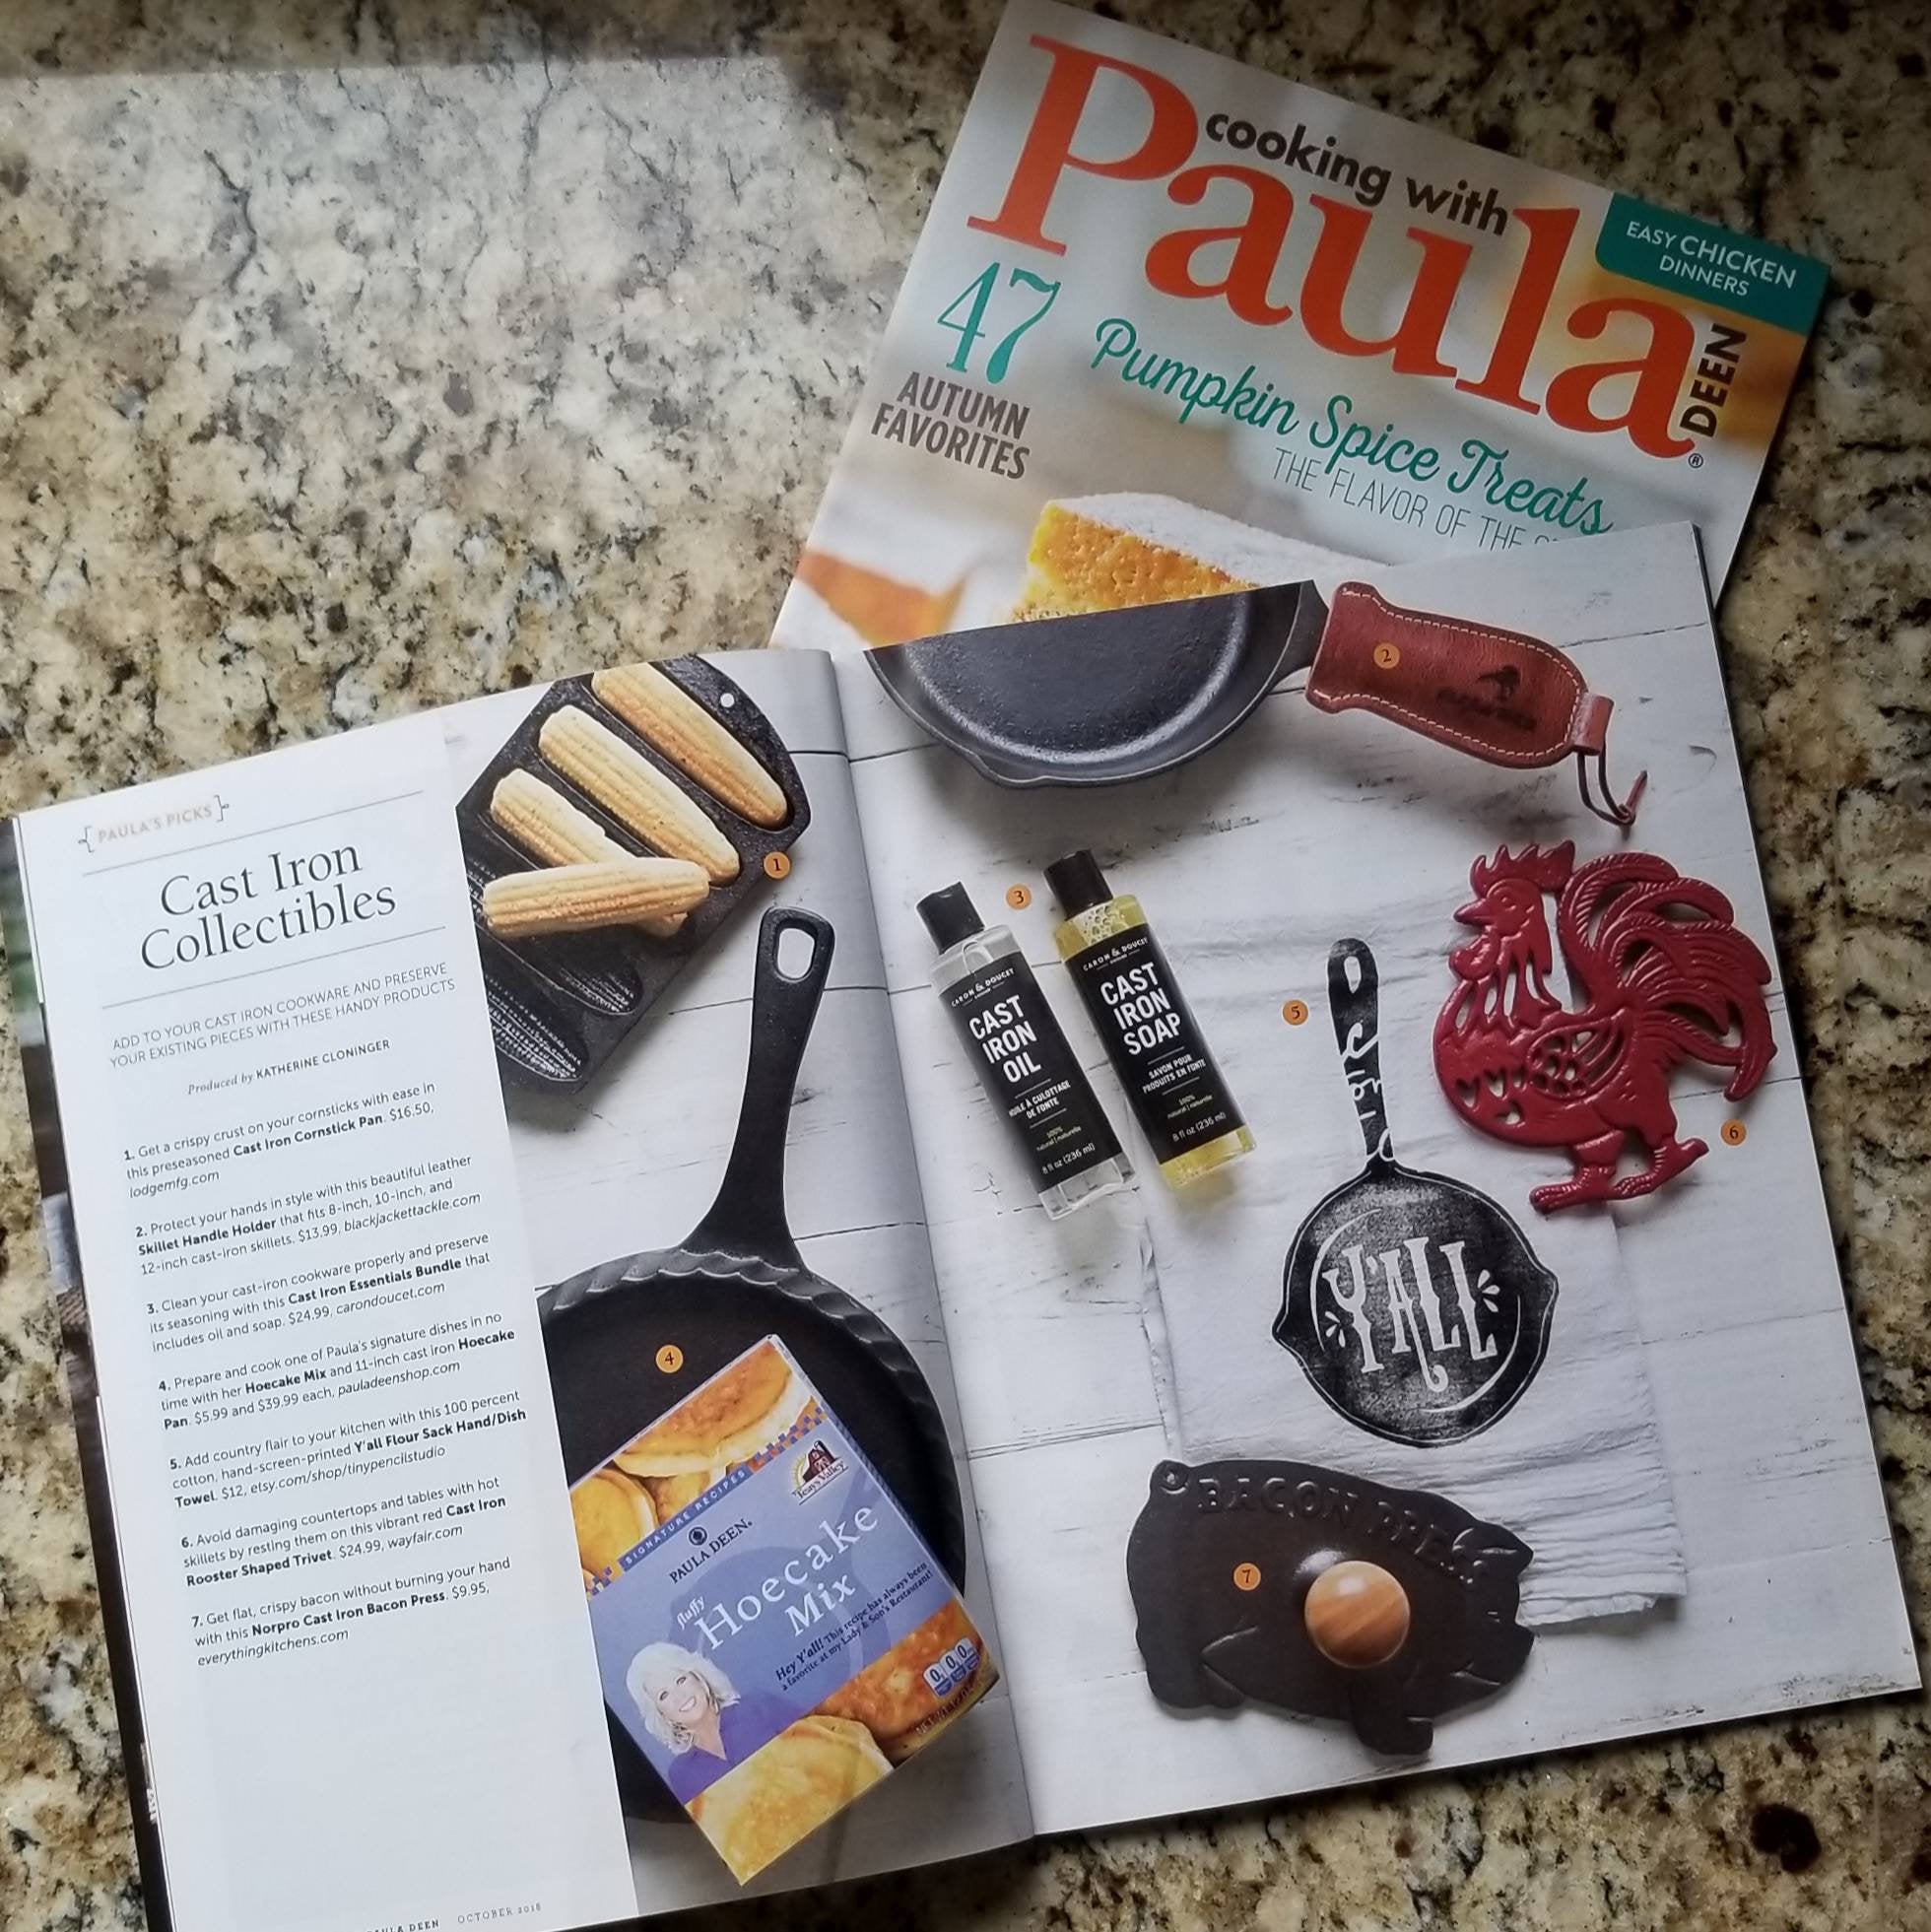 Black Jacket Tackle Company had their cast iron skillet handle holder featured in Cooking with Paula Deen magazine